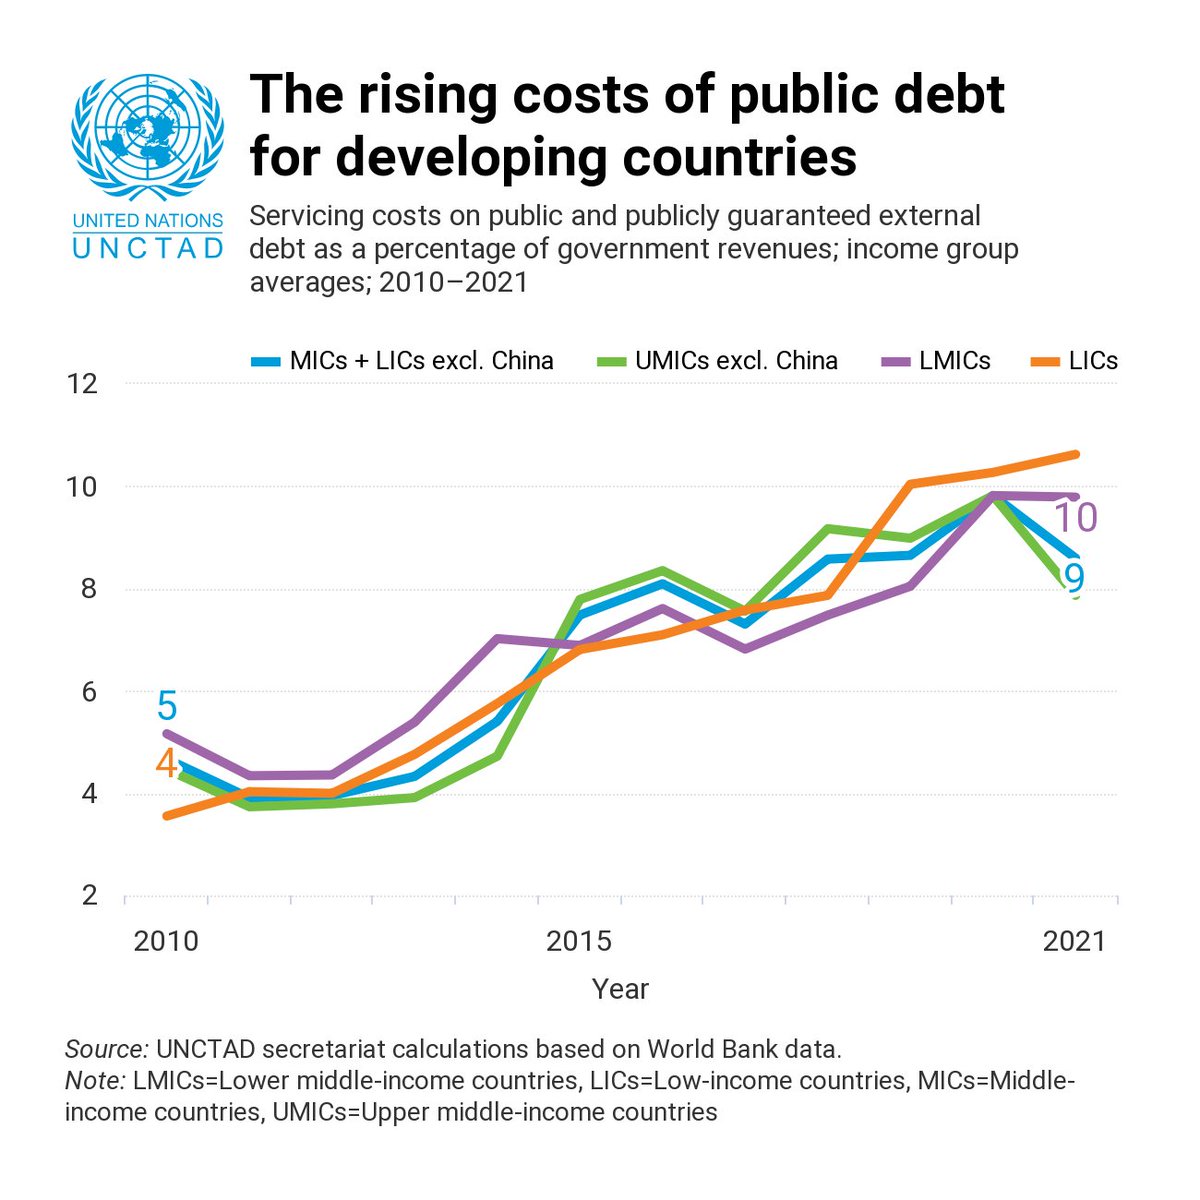 Lower middle- & low-income countries especially suffer from the rising costs of public debt. A widespread debt crisis in developing countries is likely if no action is taken. @UNCTAD provides a clear set of steps to follow to avoid this outcome ▶️ unctad.org/tdr2022